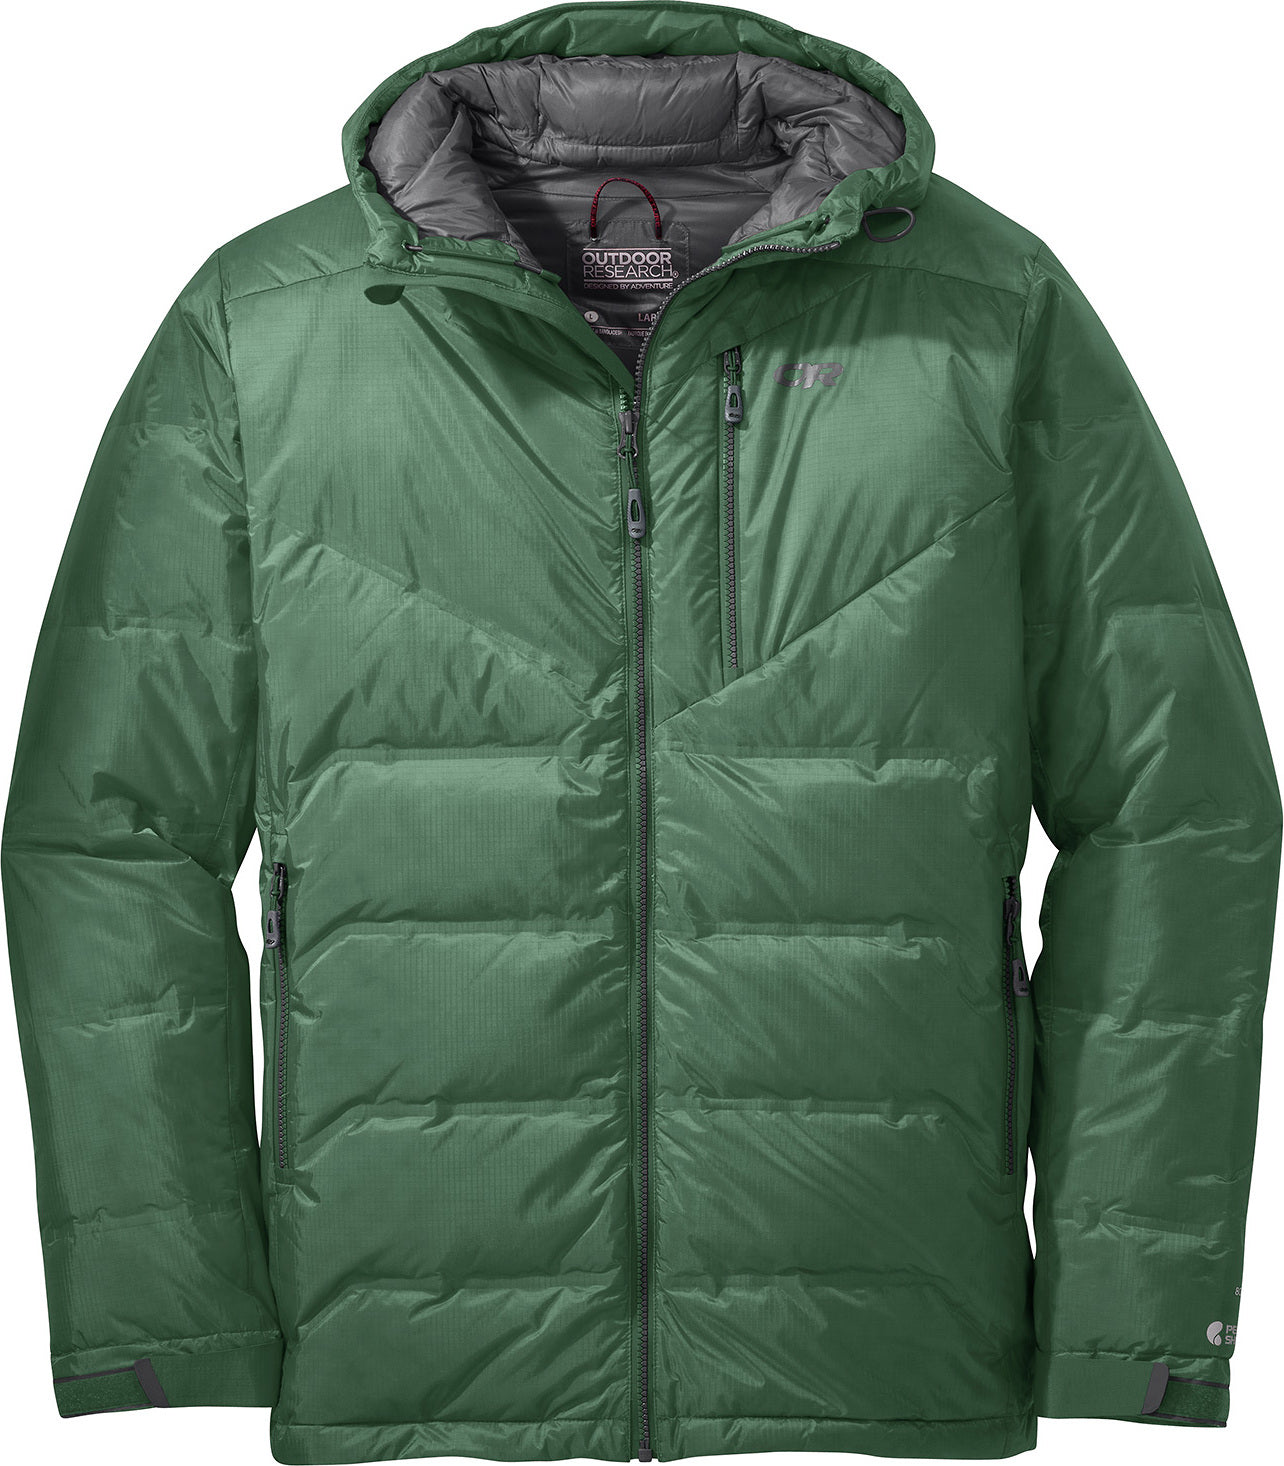 Outdoor Research Men's Floodlight Jacket | Altitude Sports